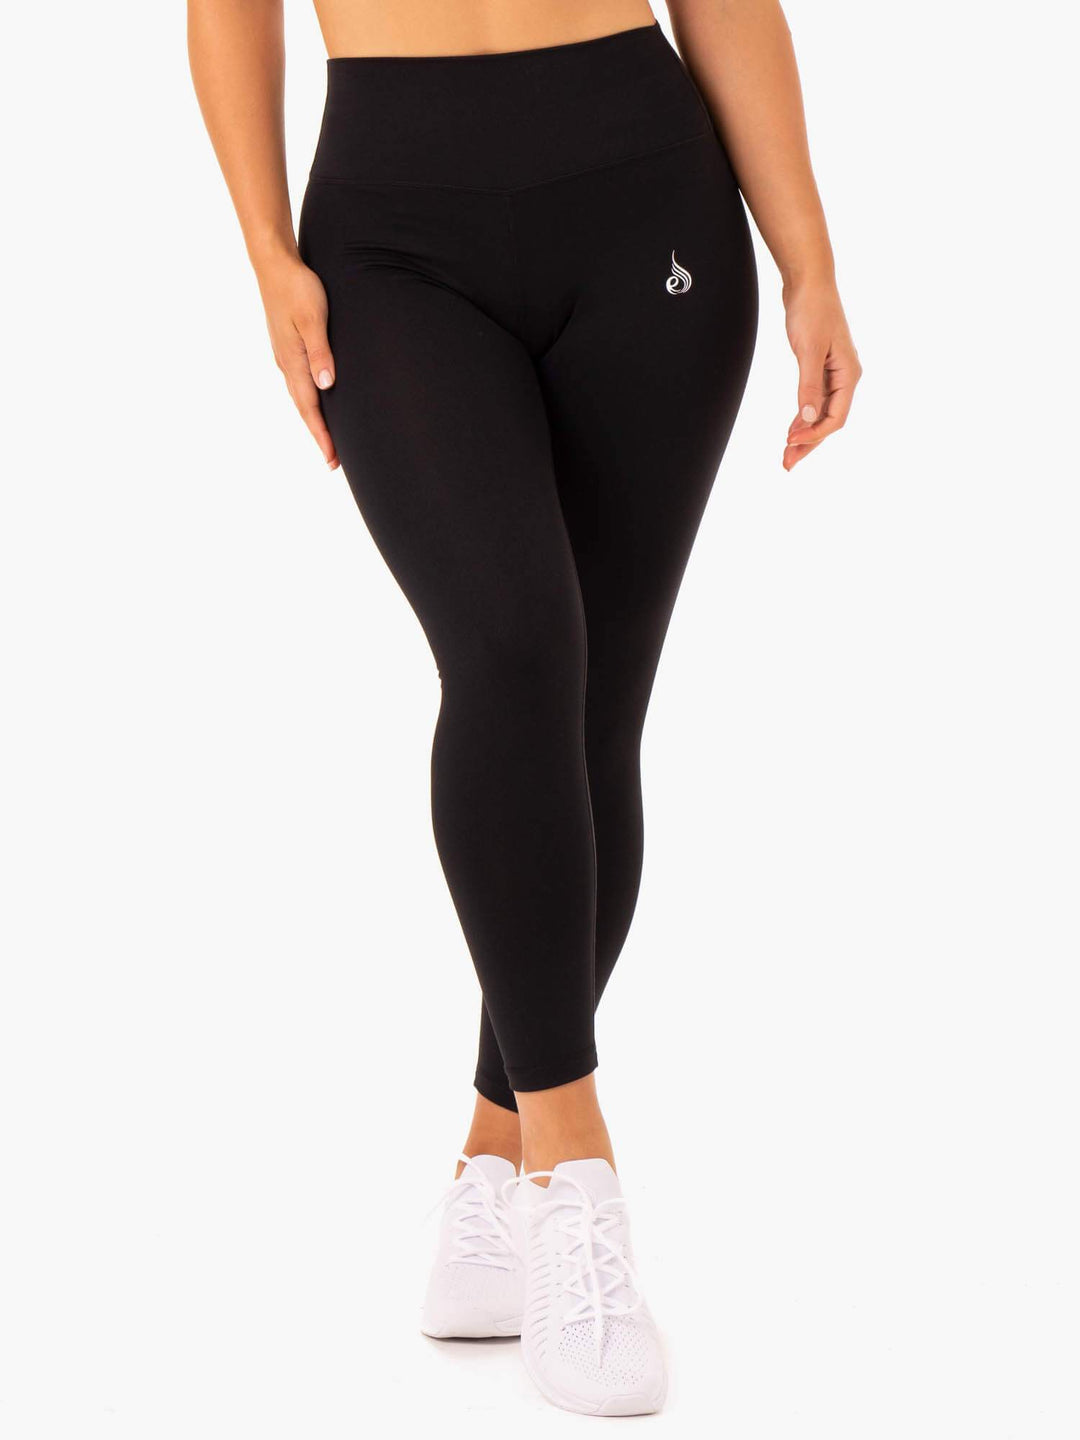 How To Find Squat-proof Leggings. Nike NL